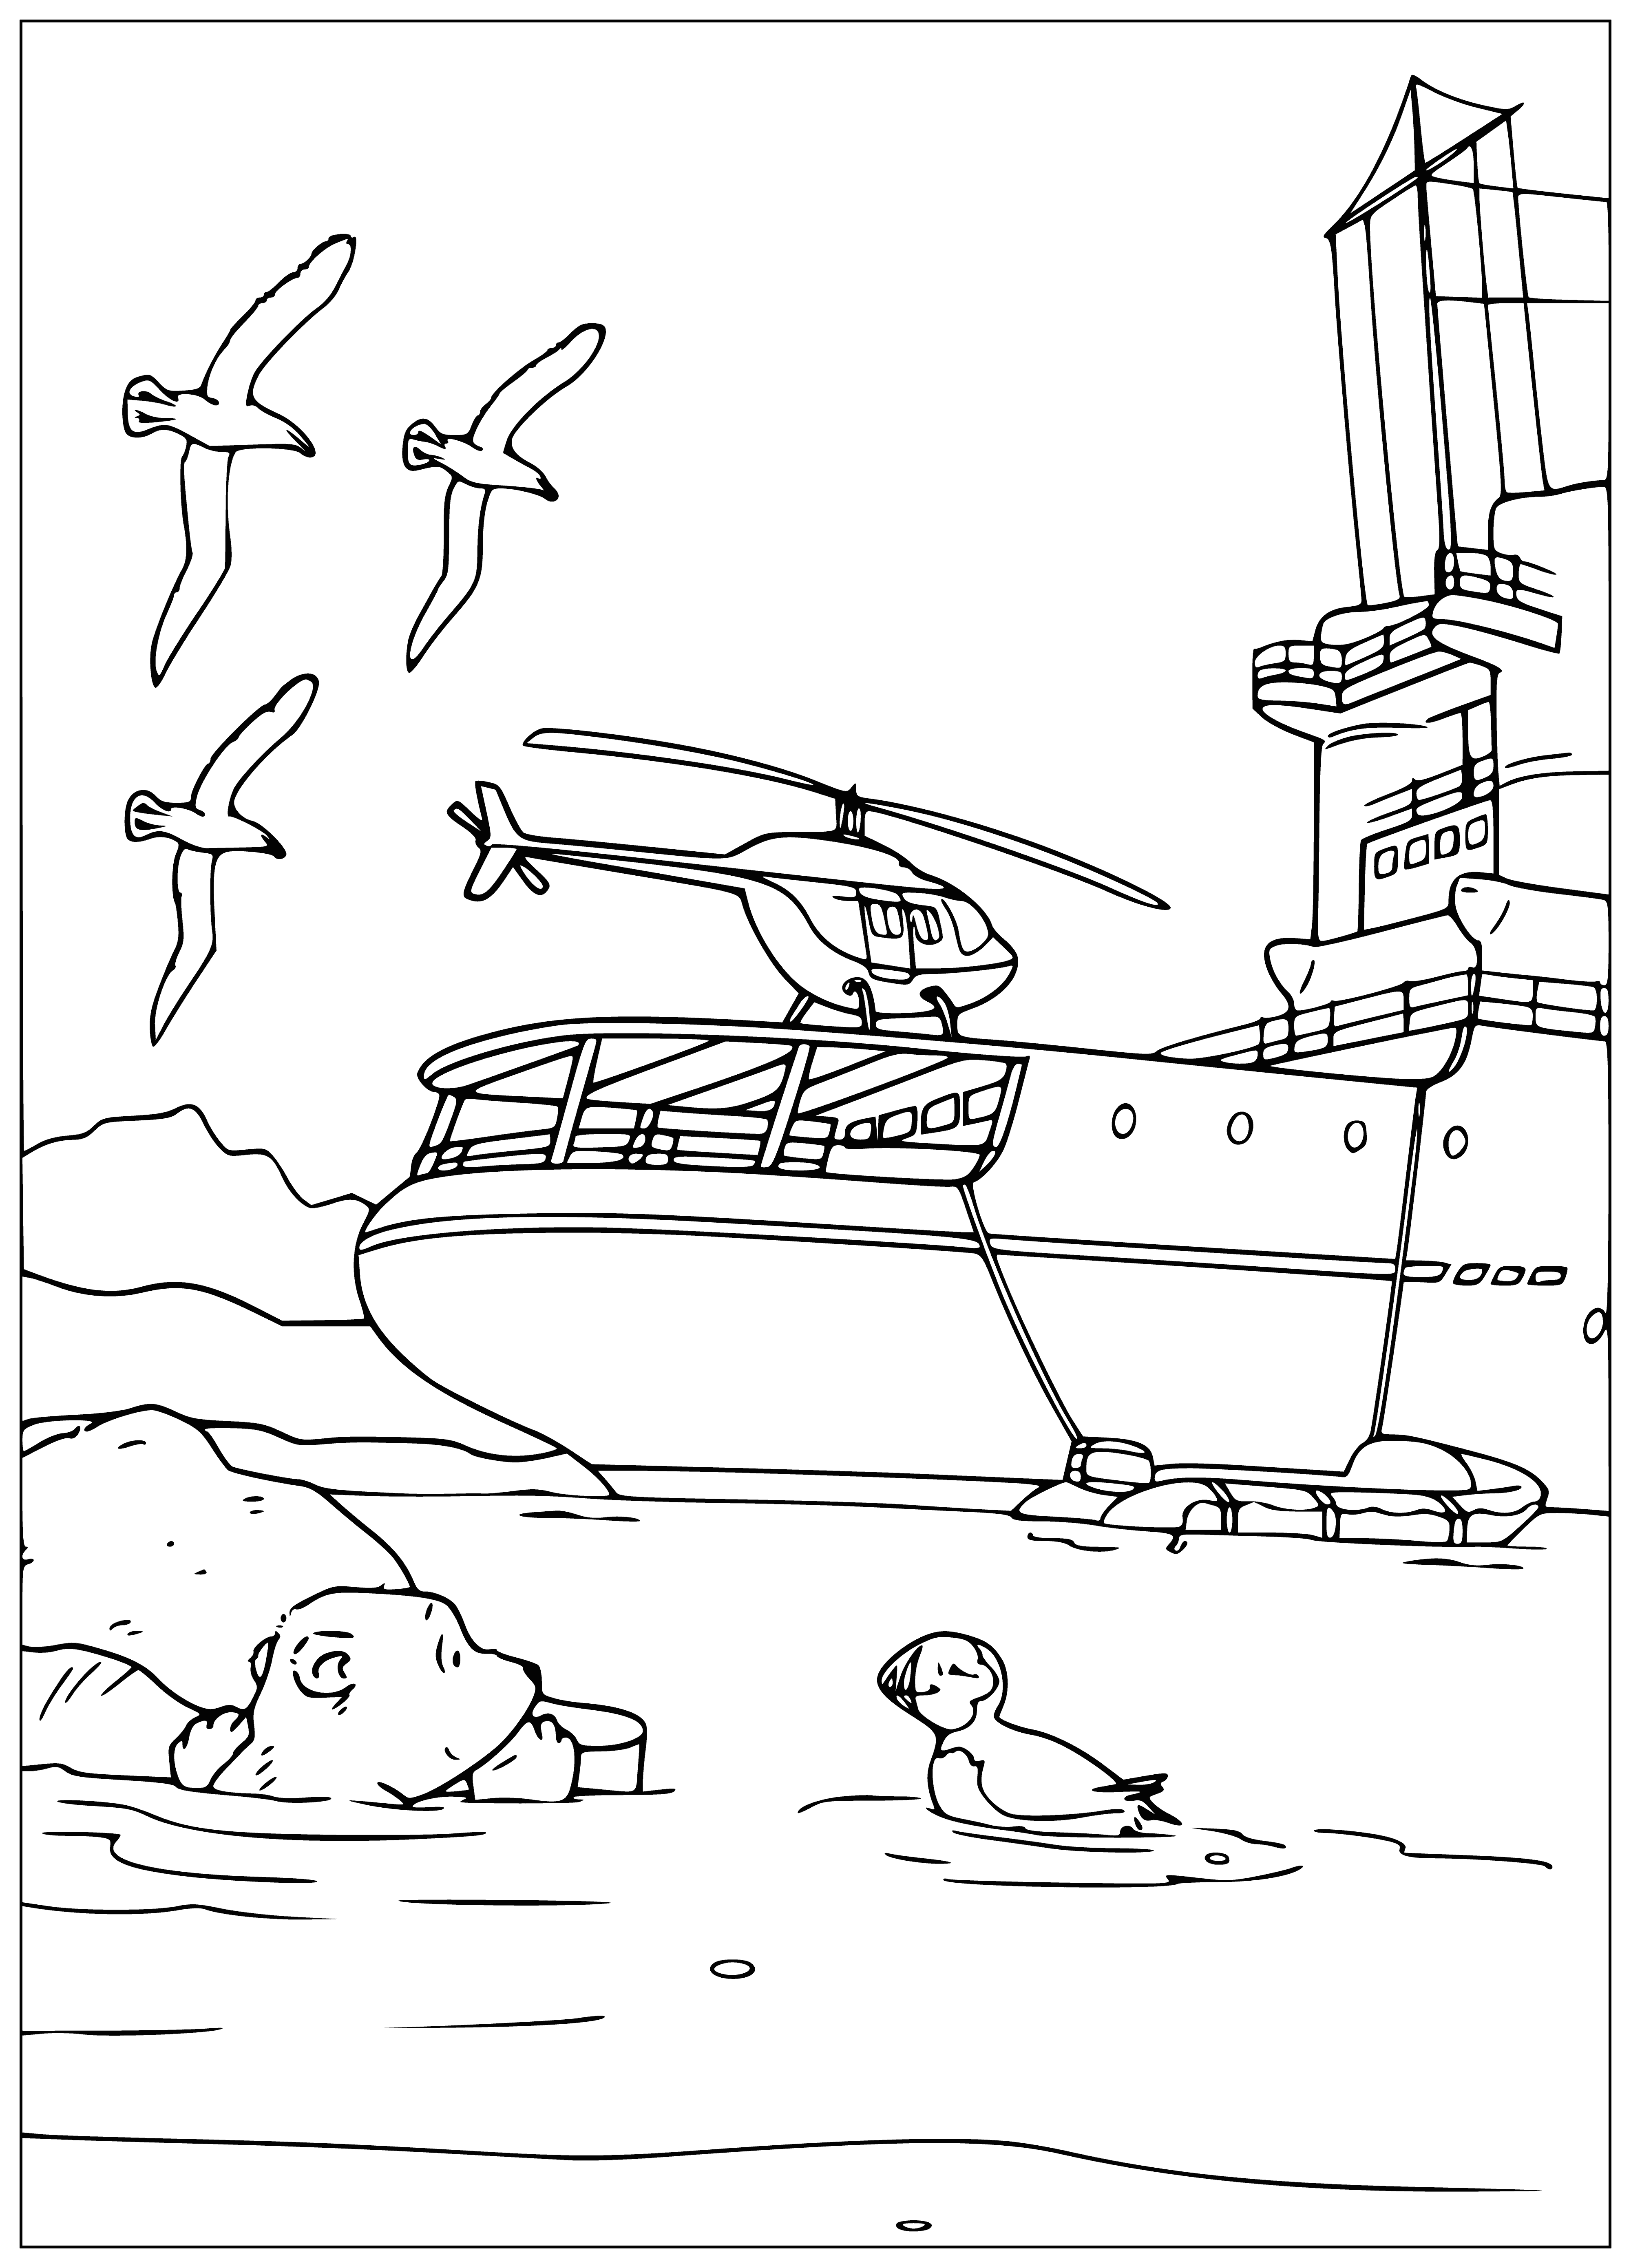 Fishing boat coloring page